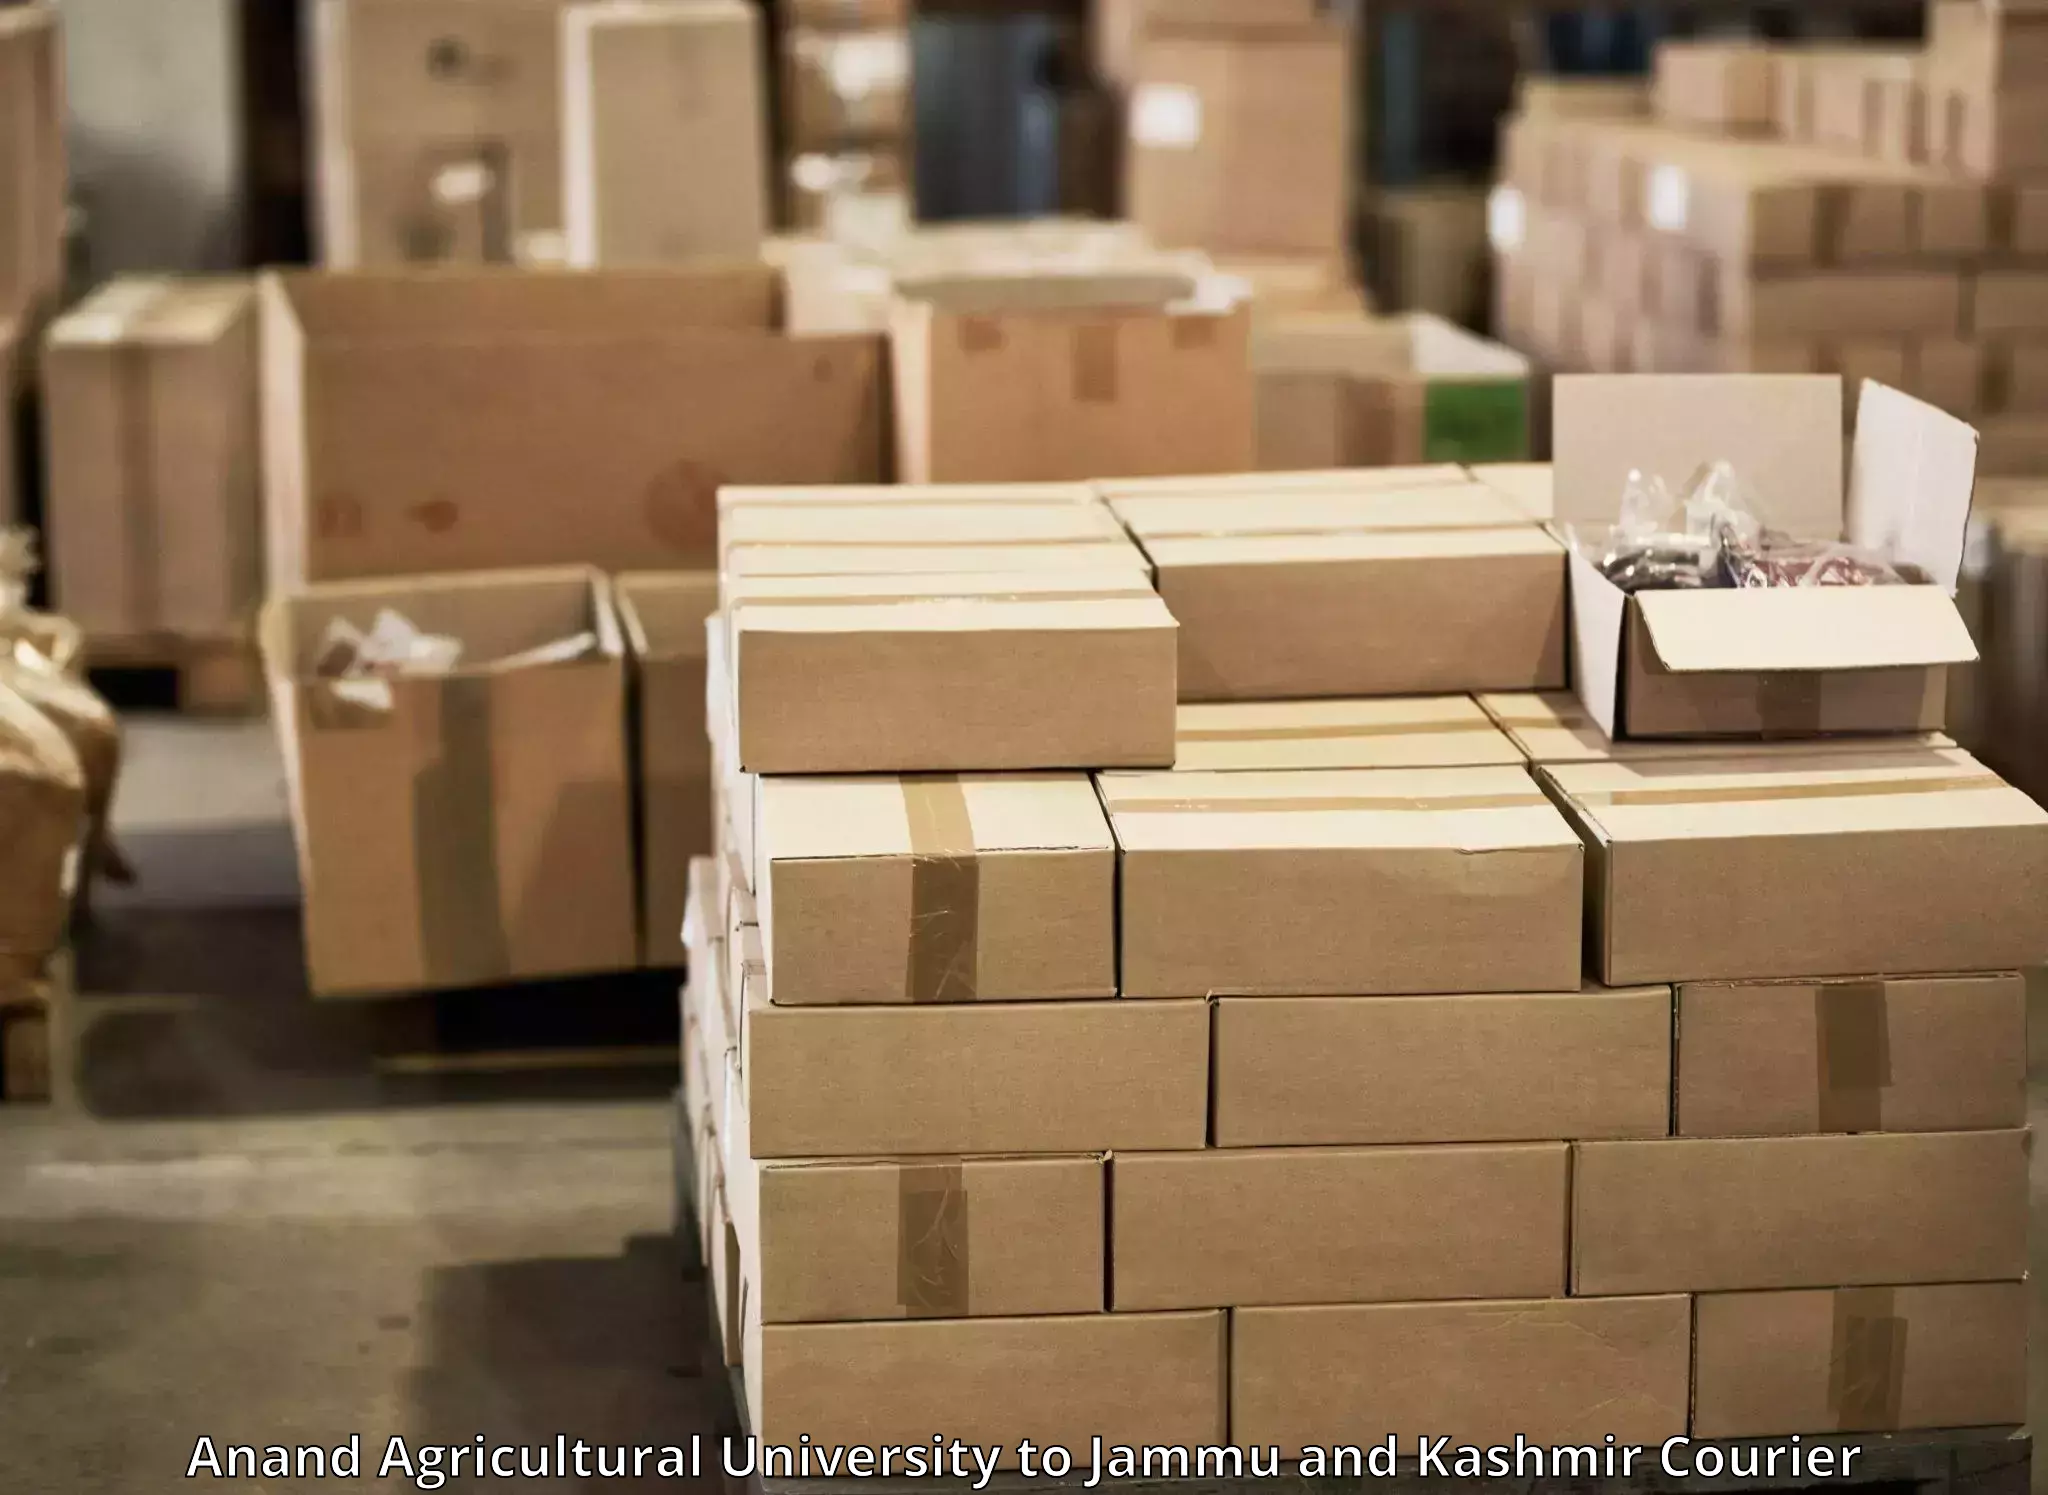 Holiday shipping services Anand Agricultural University to Baramulla